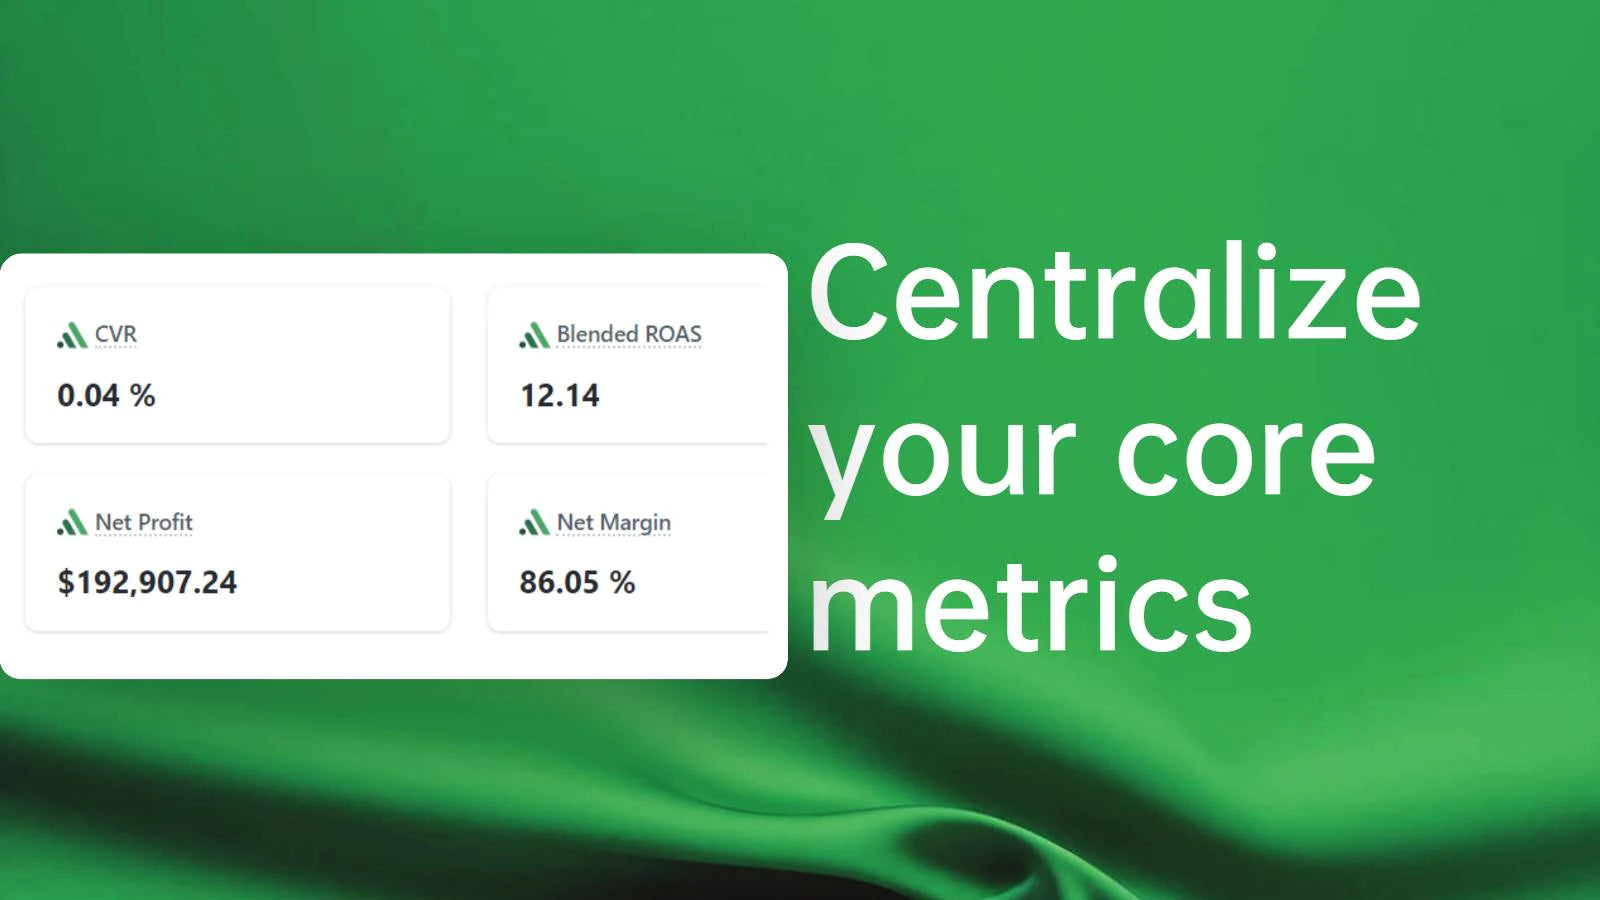 Attribuly Marketing Analytics you can centralize your score metrics